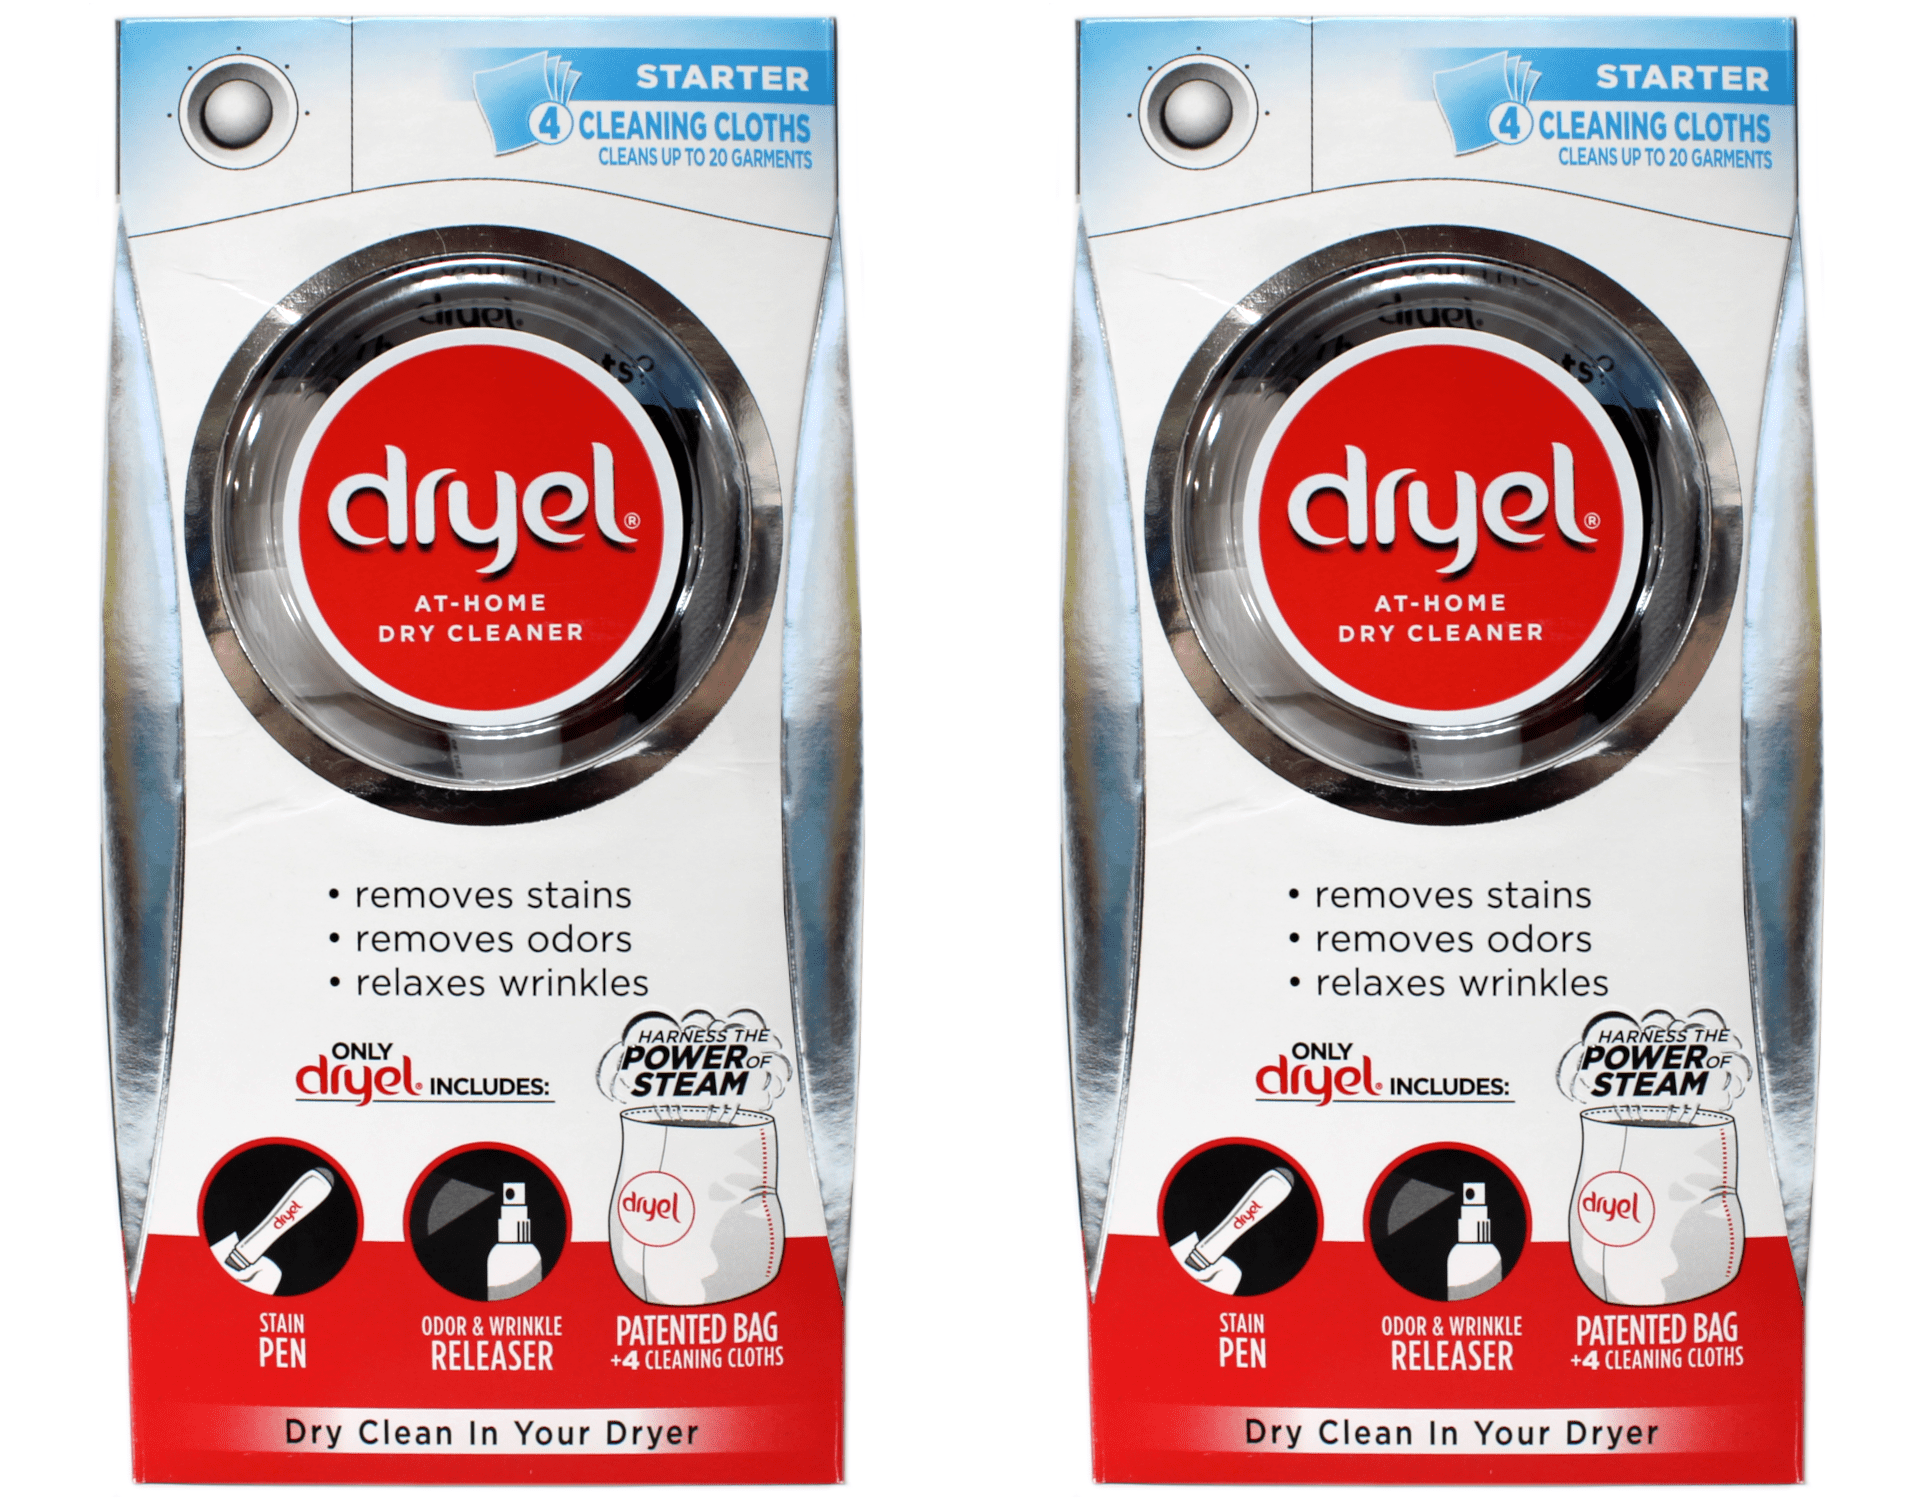 Dryel At Home Dry Cleaner REFILL Kit 8 Dryer Activated Cleaning Cloths 